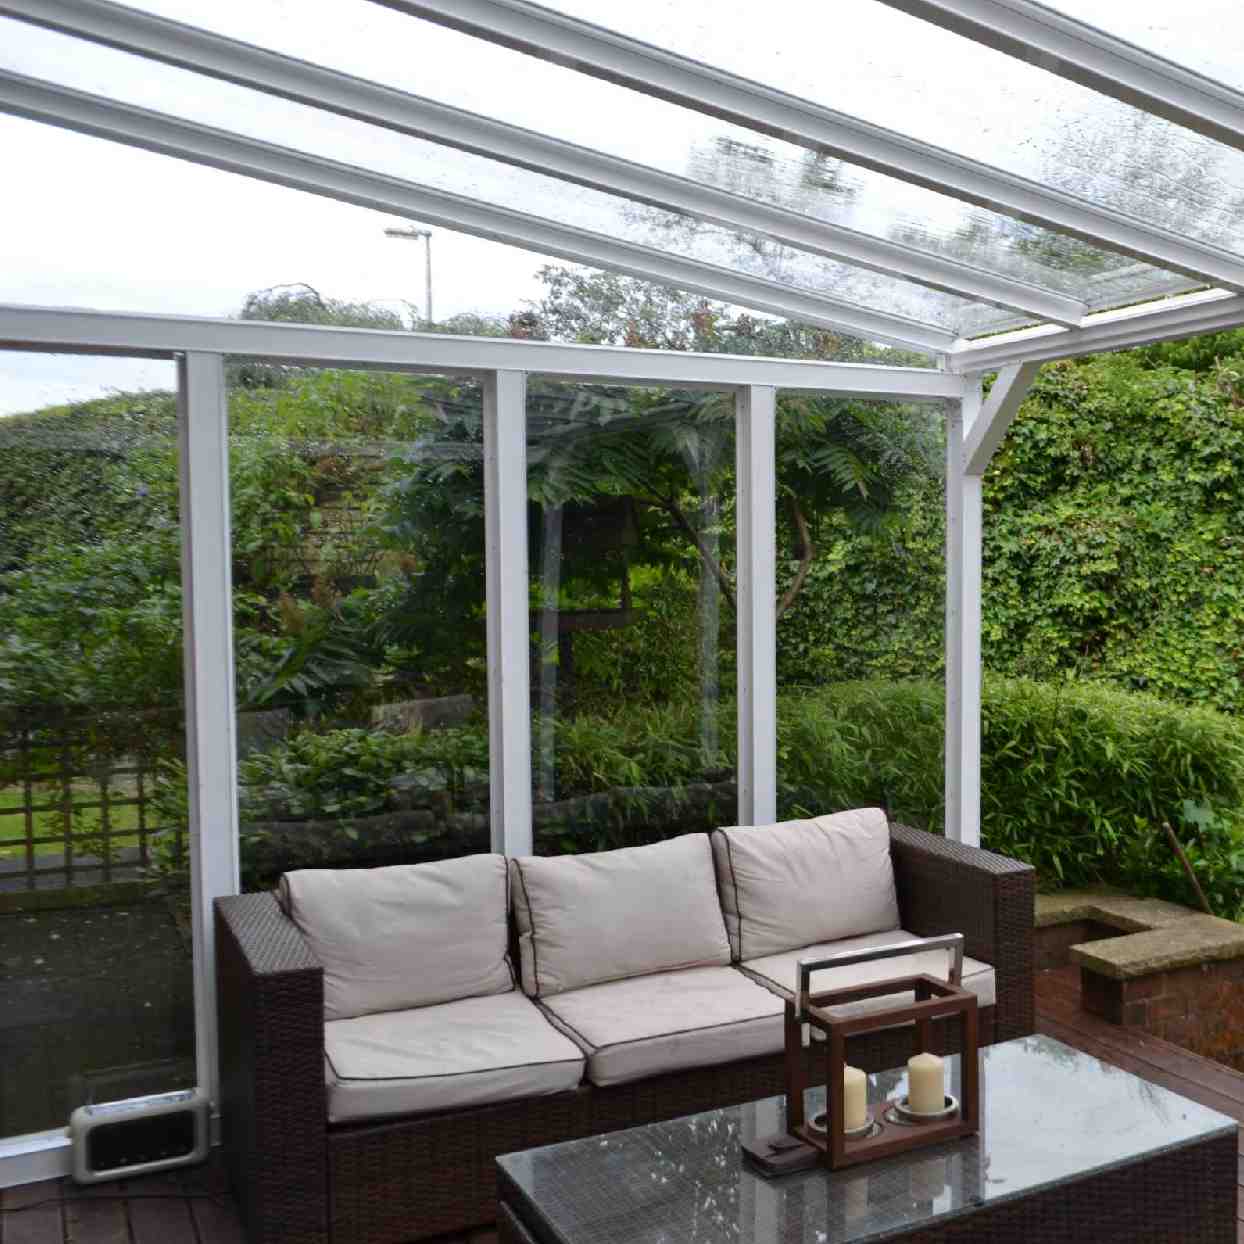 Buy Omega Verandah White with 16mm Polycarbonate Glazing - 6.0m (W) x 3.5m (P), (3) Supporting Posts online today